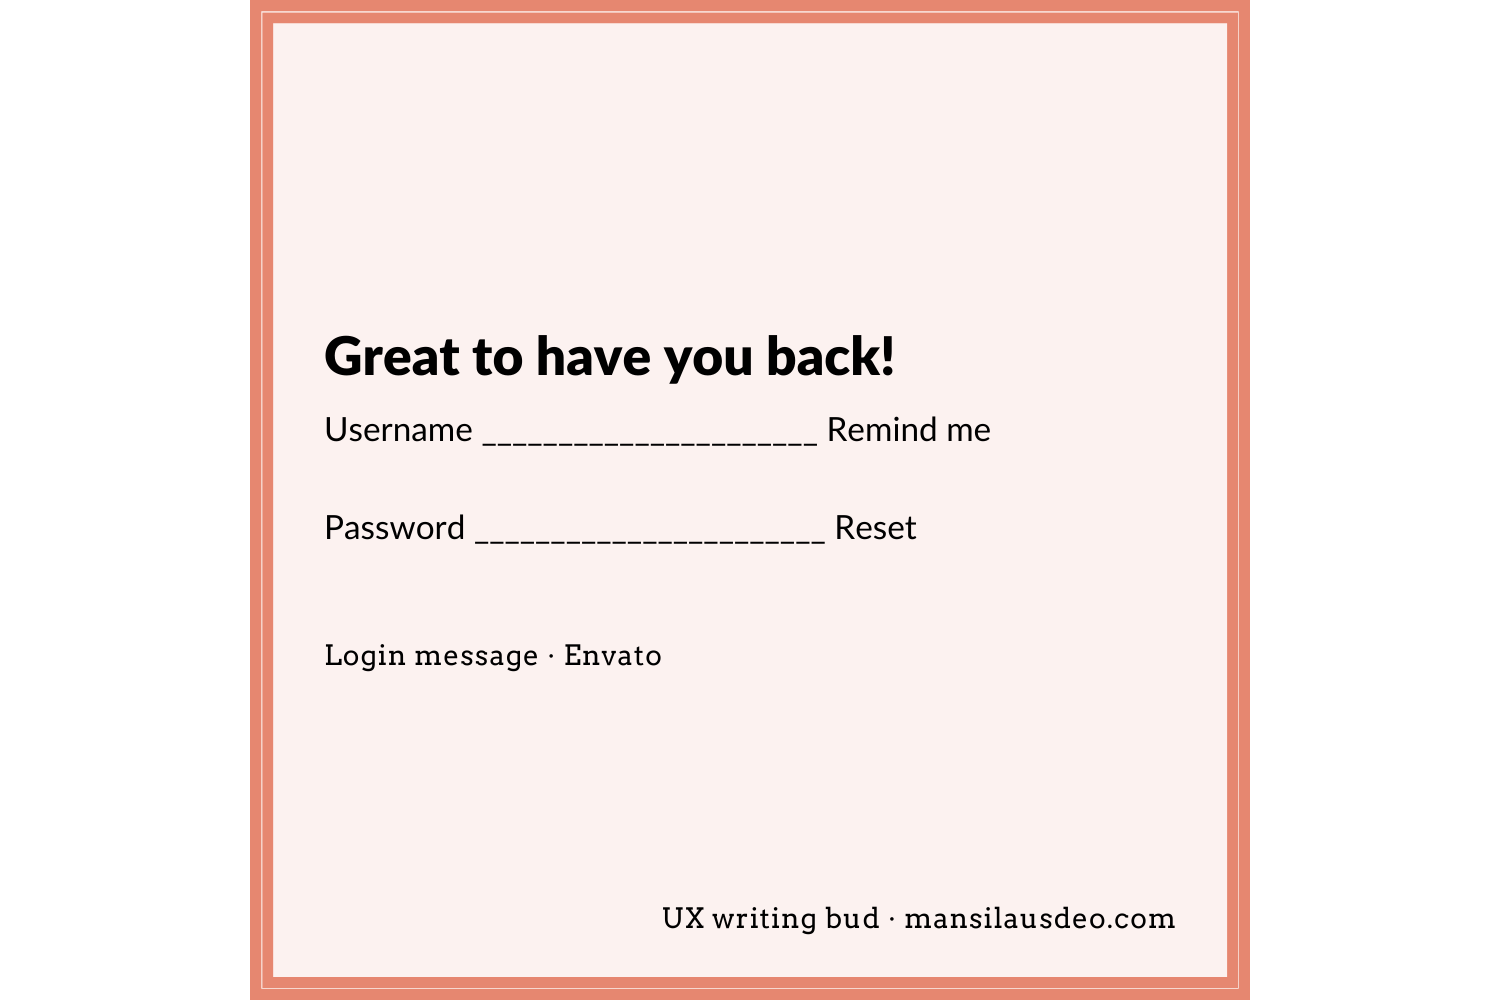 Great to have your back! Username - Remind me Password - Reset Login message - Envato UX writing bud